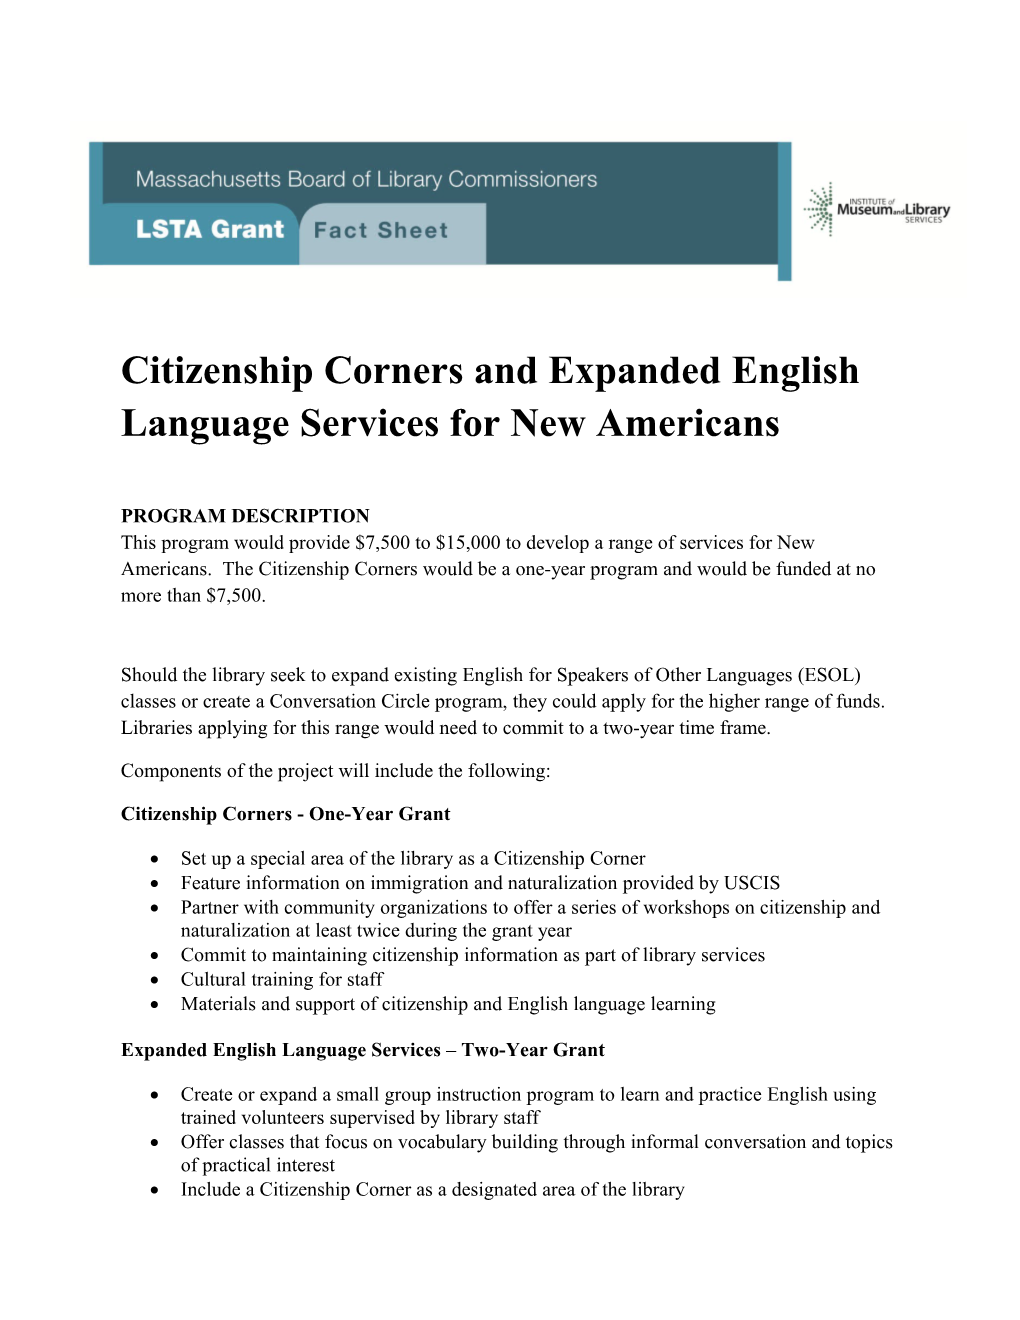 Citizenship Corners and Expanded English Language Services for New Americans - FY19 LSTA